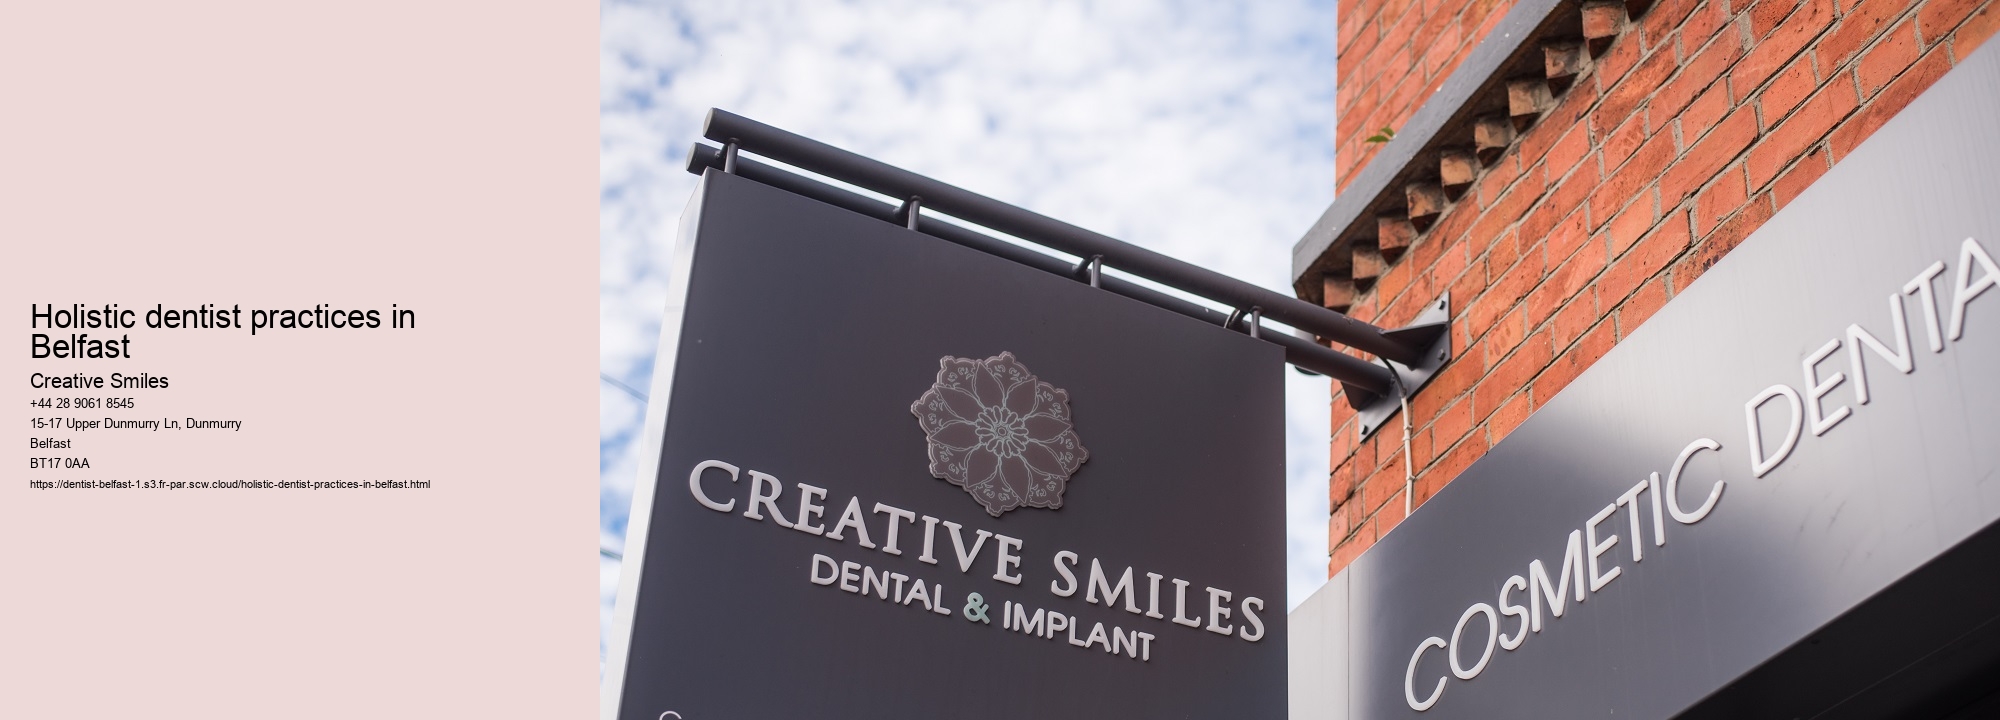 Holistic dentist practices in Belfast